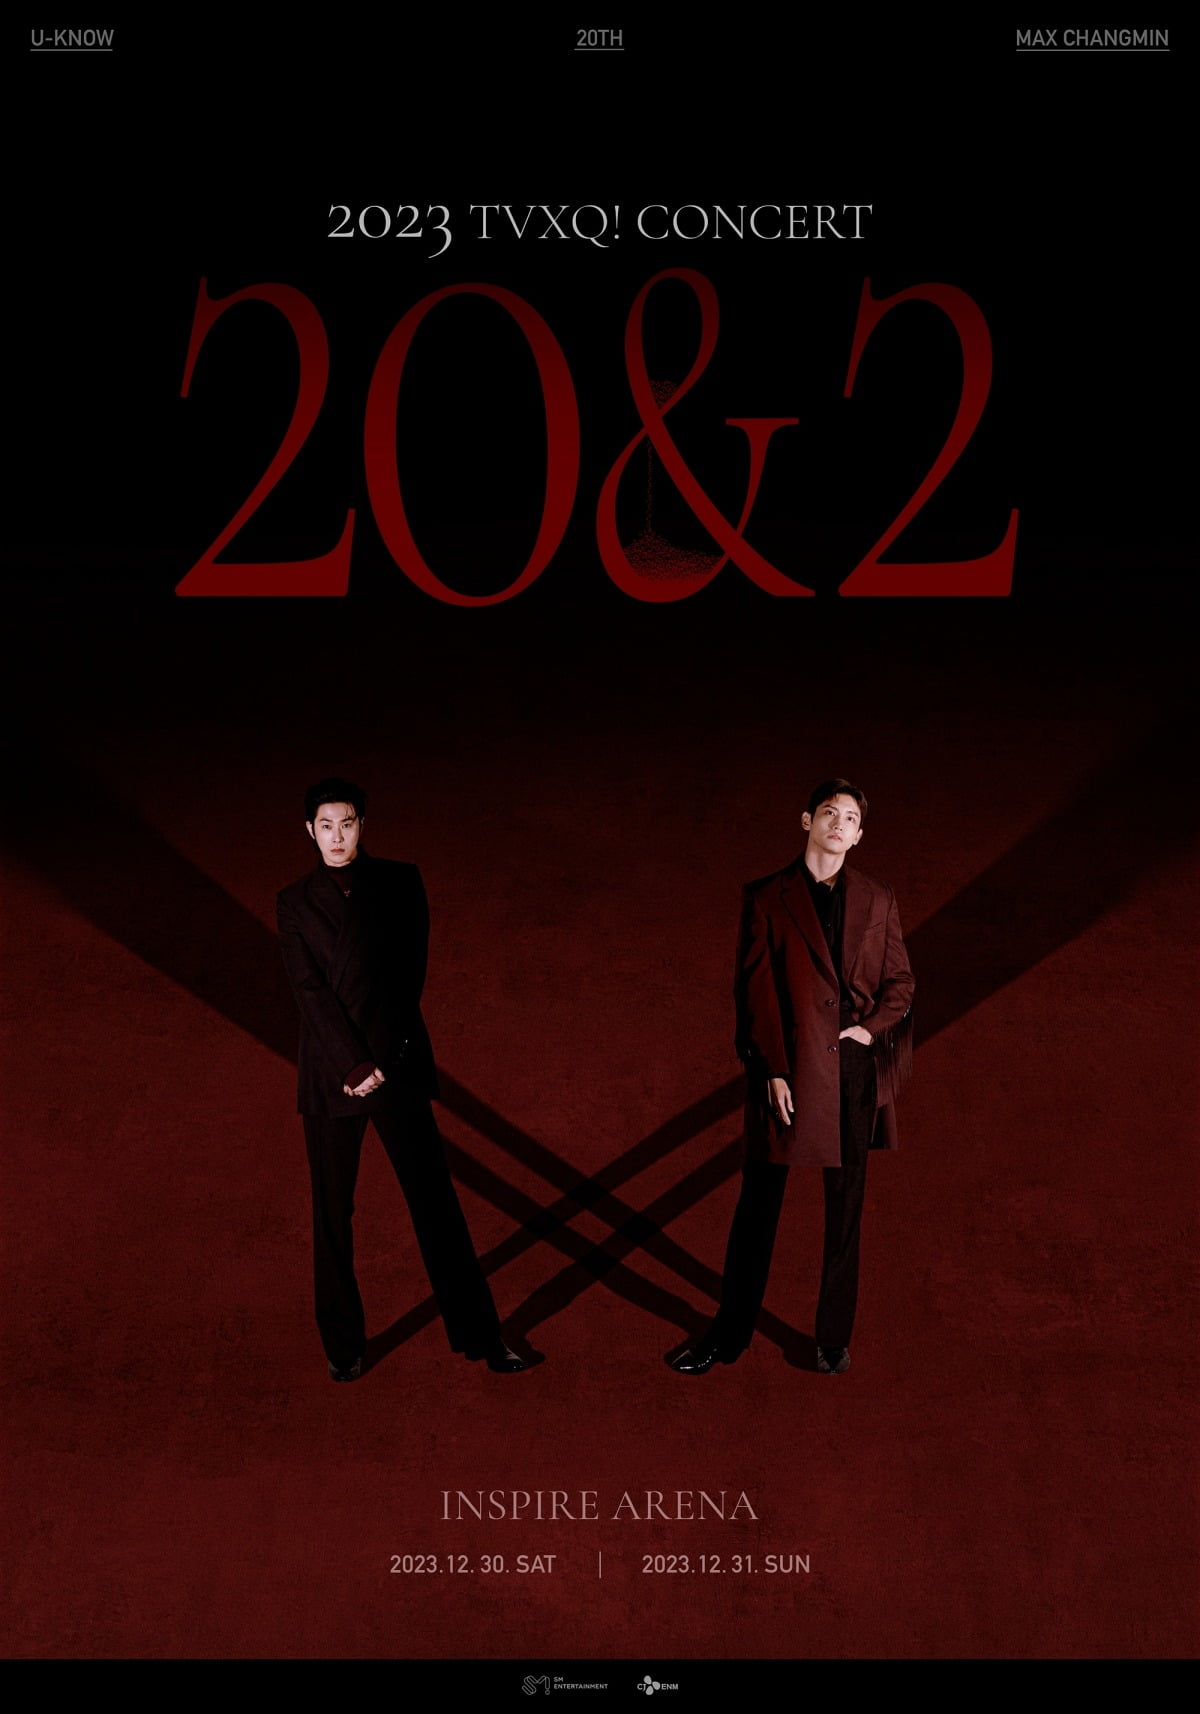 TVXQ's 20th anniversary concert will be held at the end of 2023